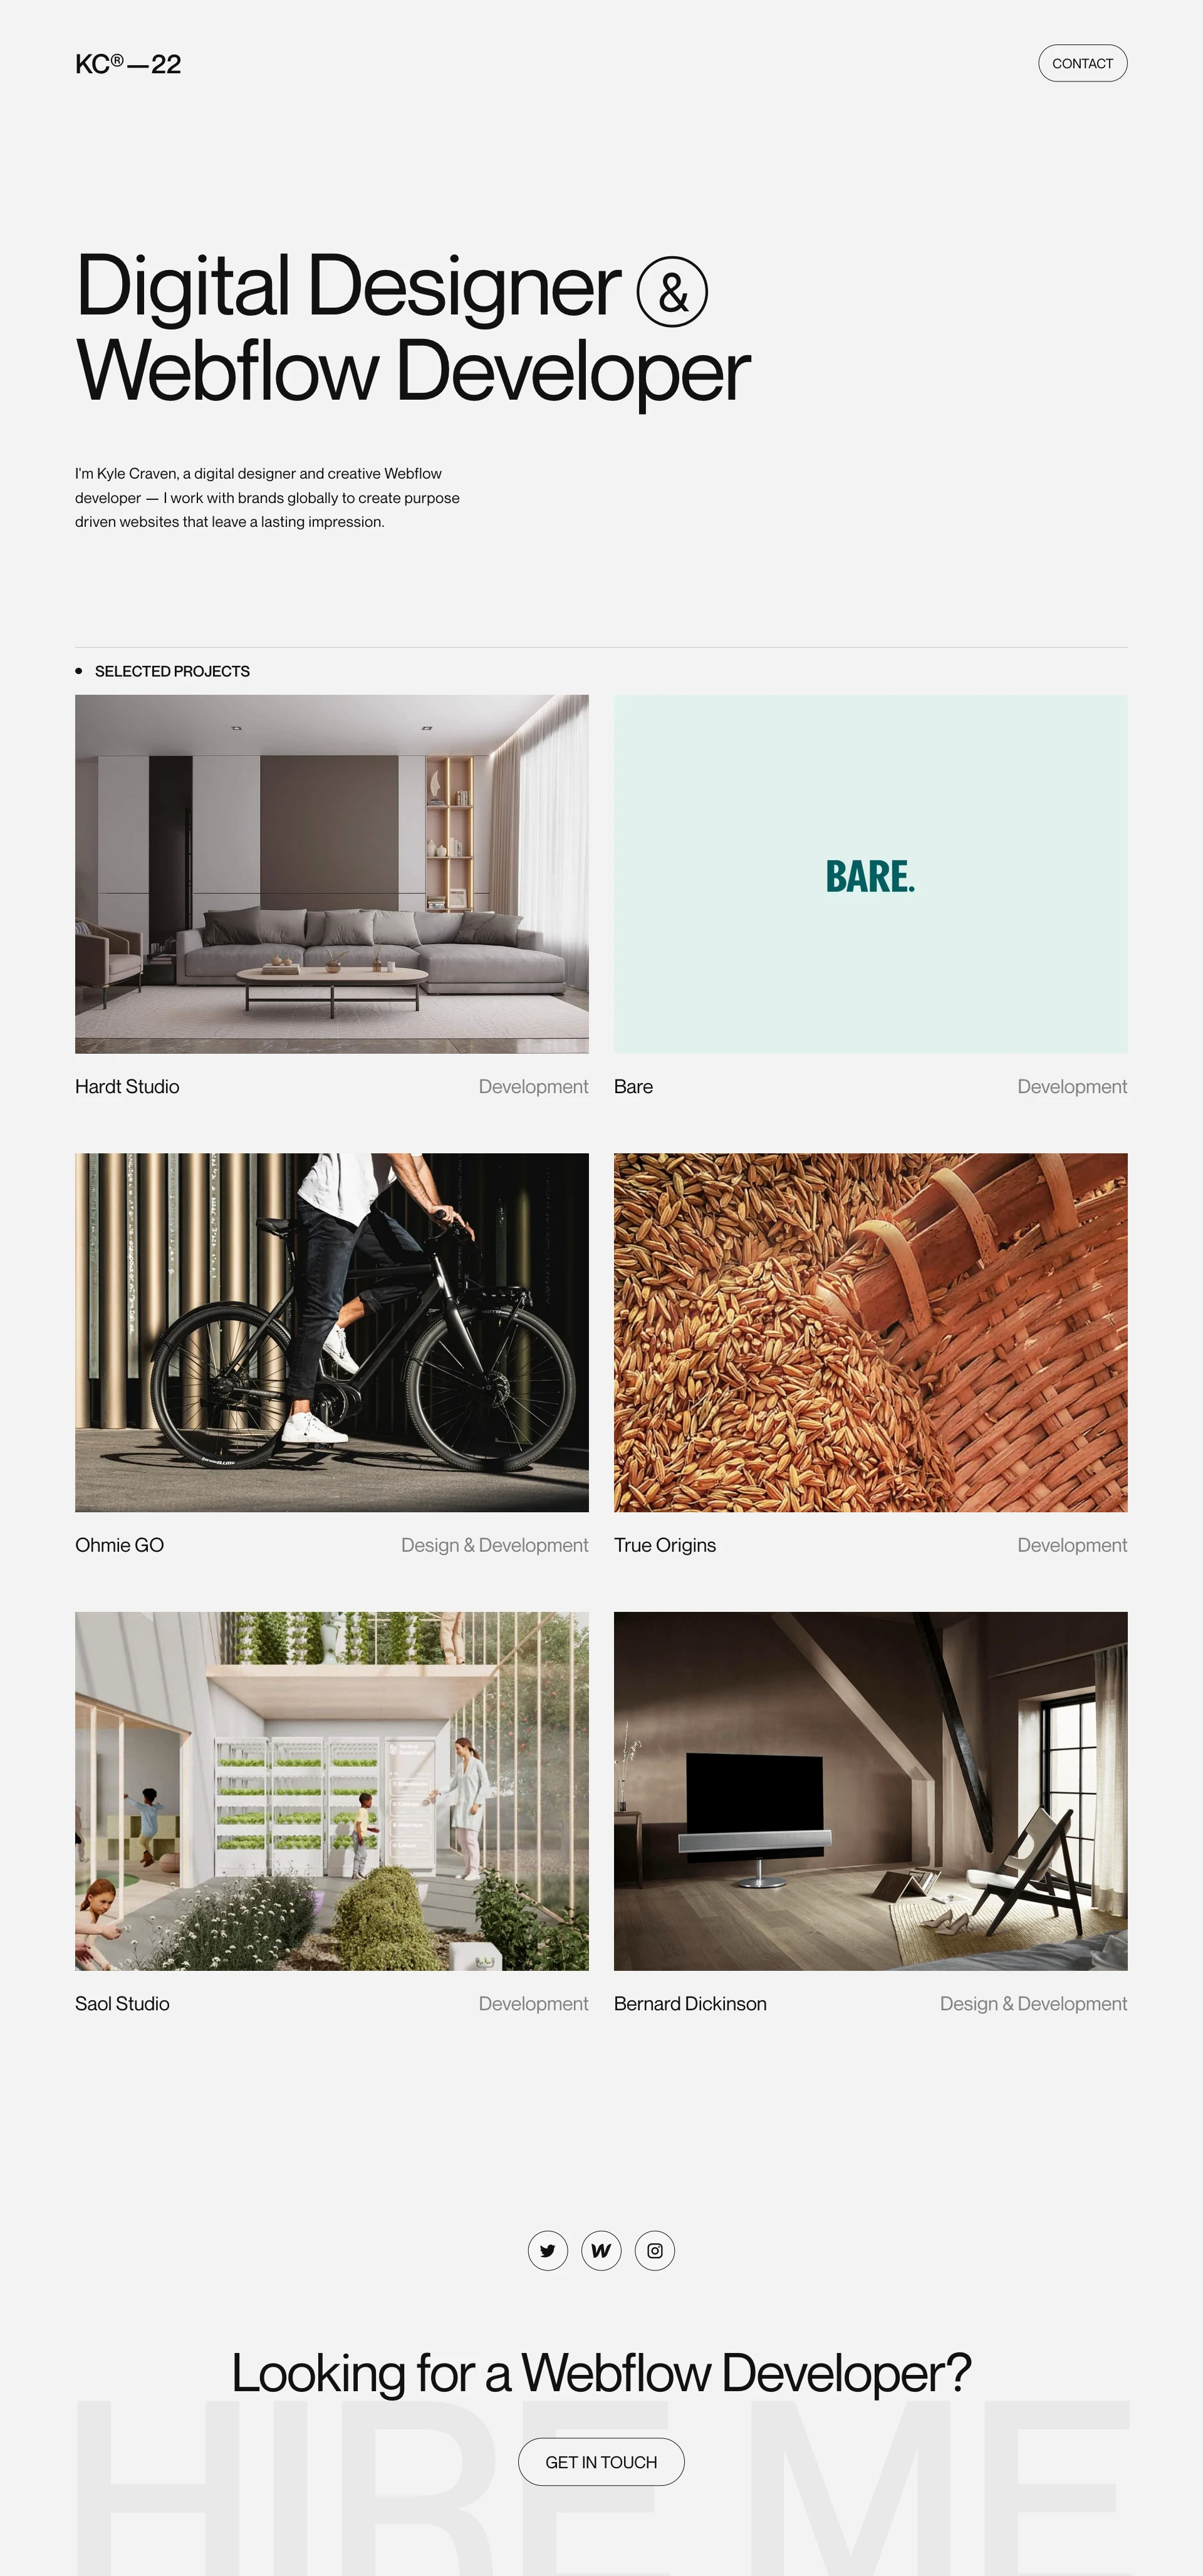 Kyle Craven Landing Page Example: I'm Kyle Craven, a digital designer and creative Webflow developer — I work with brands globally to create purpose driven websites that leave a lasting impression.